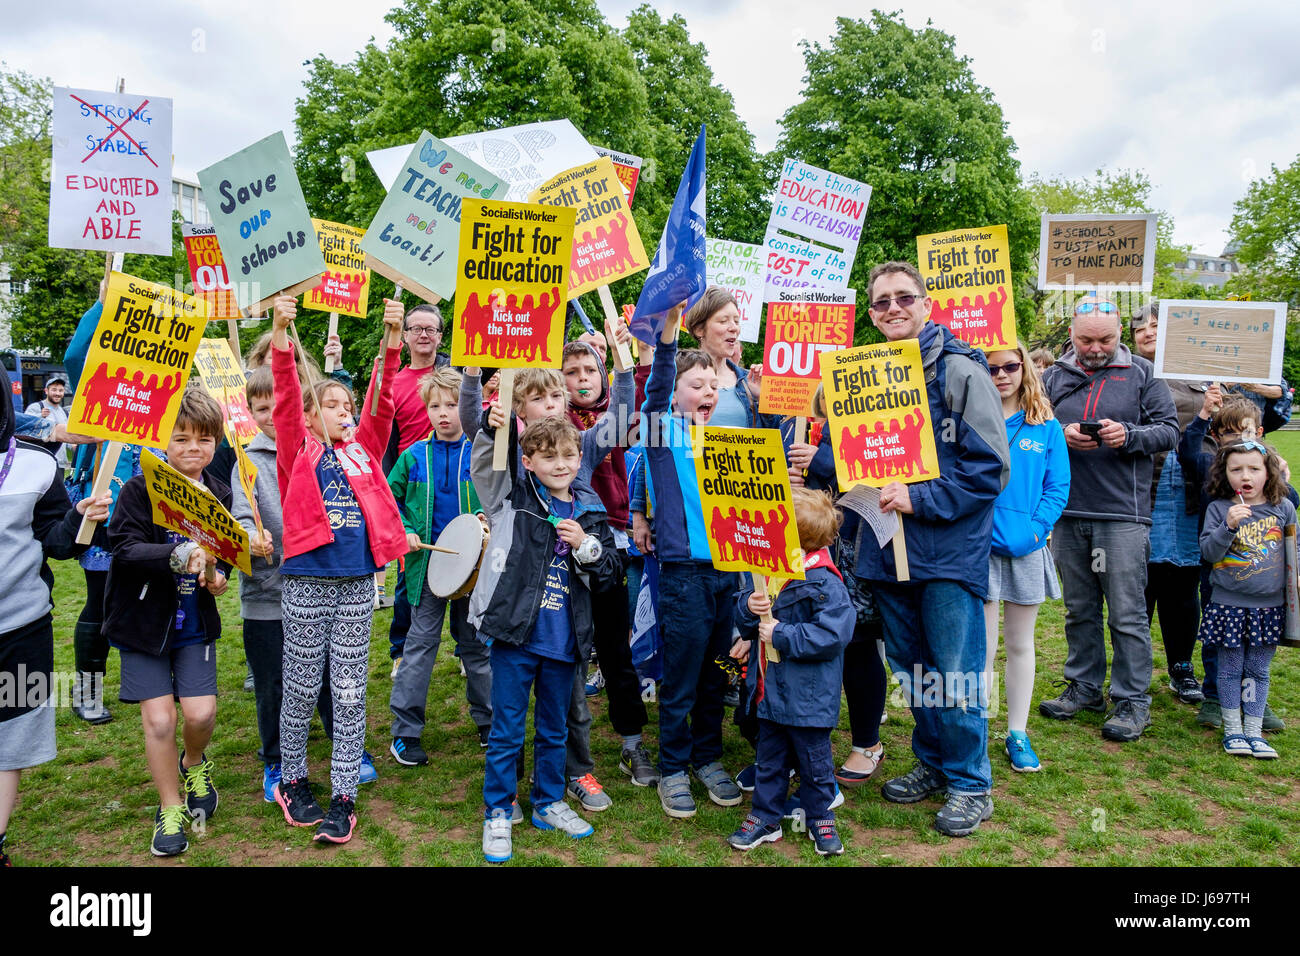 Bristol,UK. 20th May, 2017. School children are pictured as they take part in a protest march in Bristol,the march was held to defend education and to stop the cutting of funding to schools. Credit: lynchpics/Alamy Live News Stock Photo